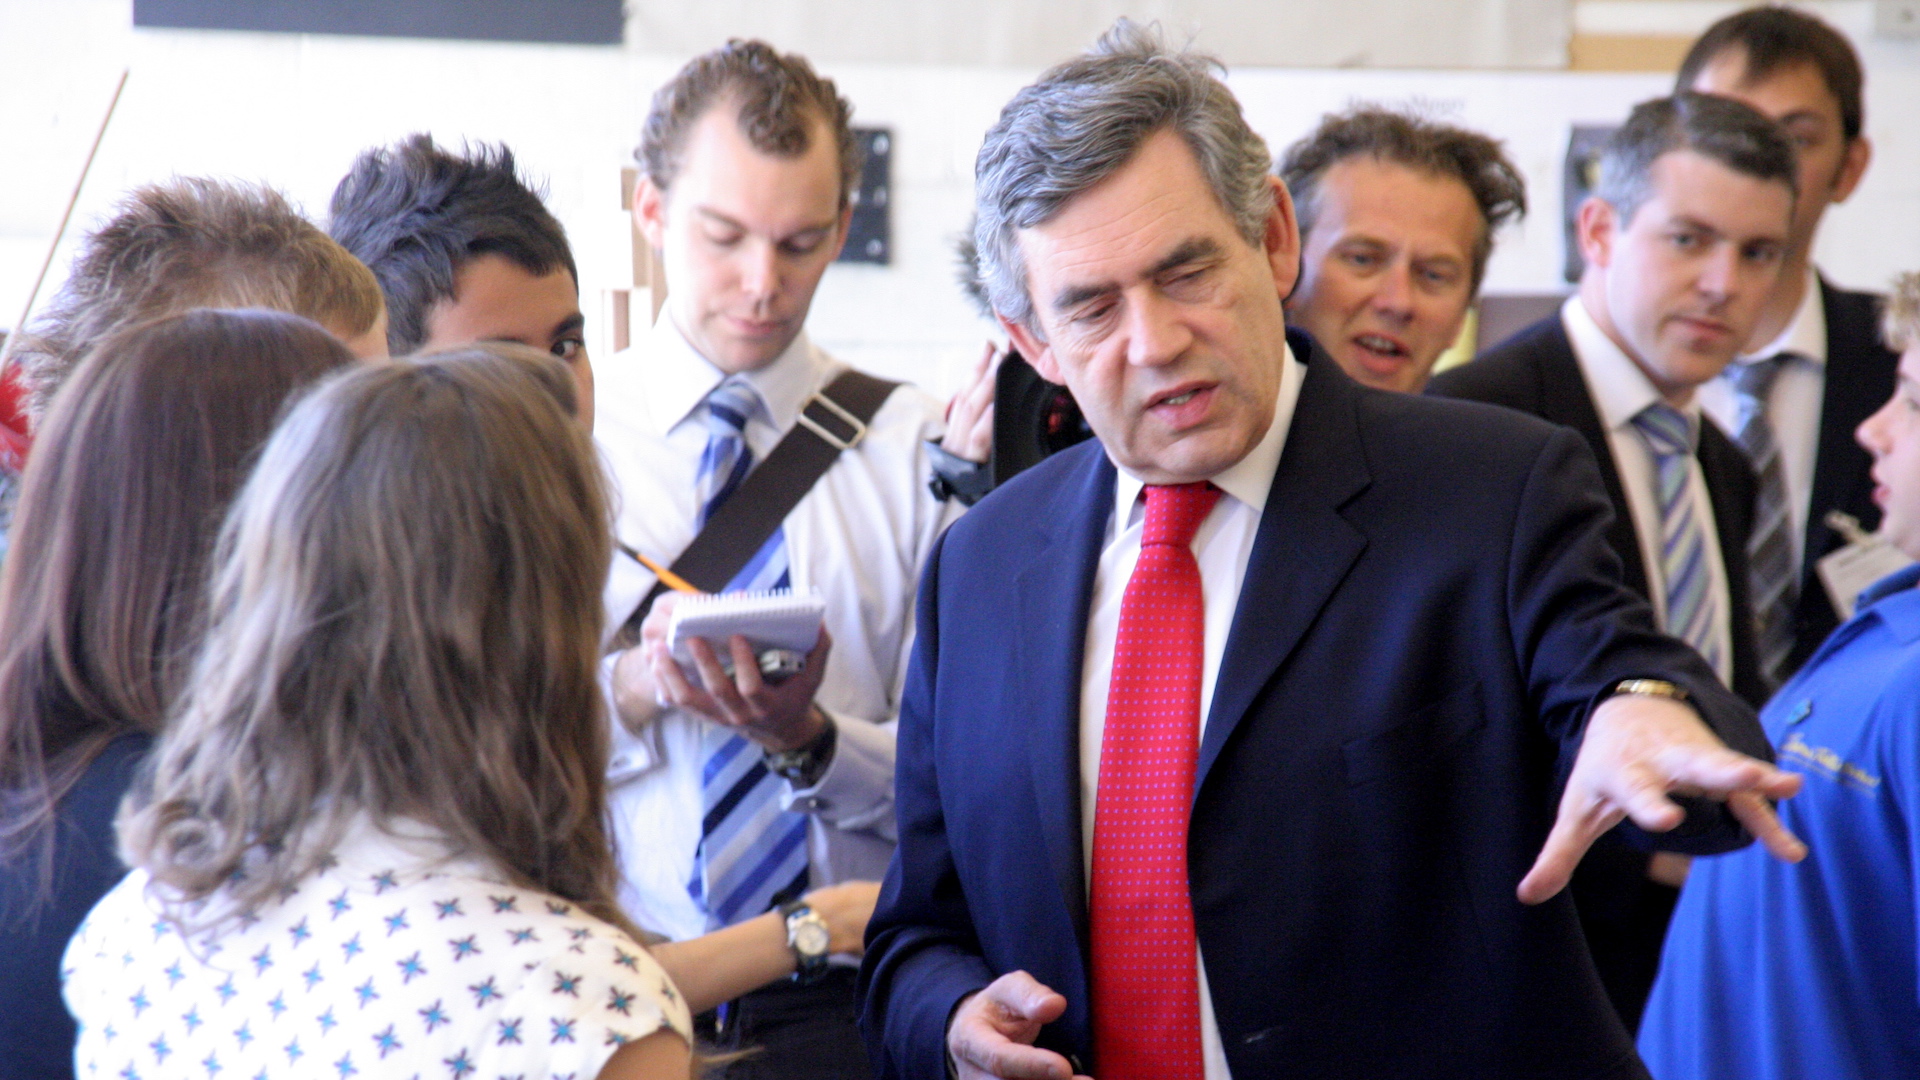 Gordon Brown wears a red tie and suit and talks to a woman with one hand outstretched